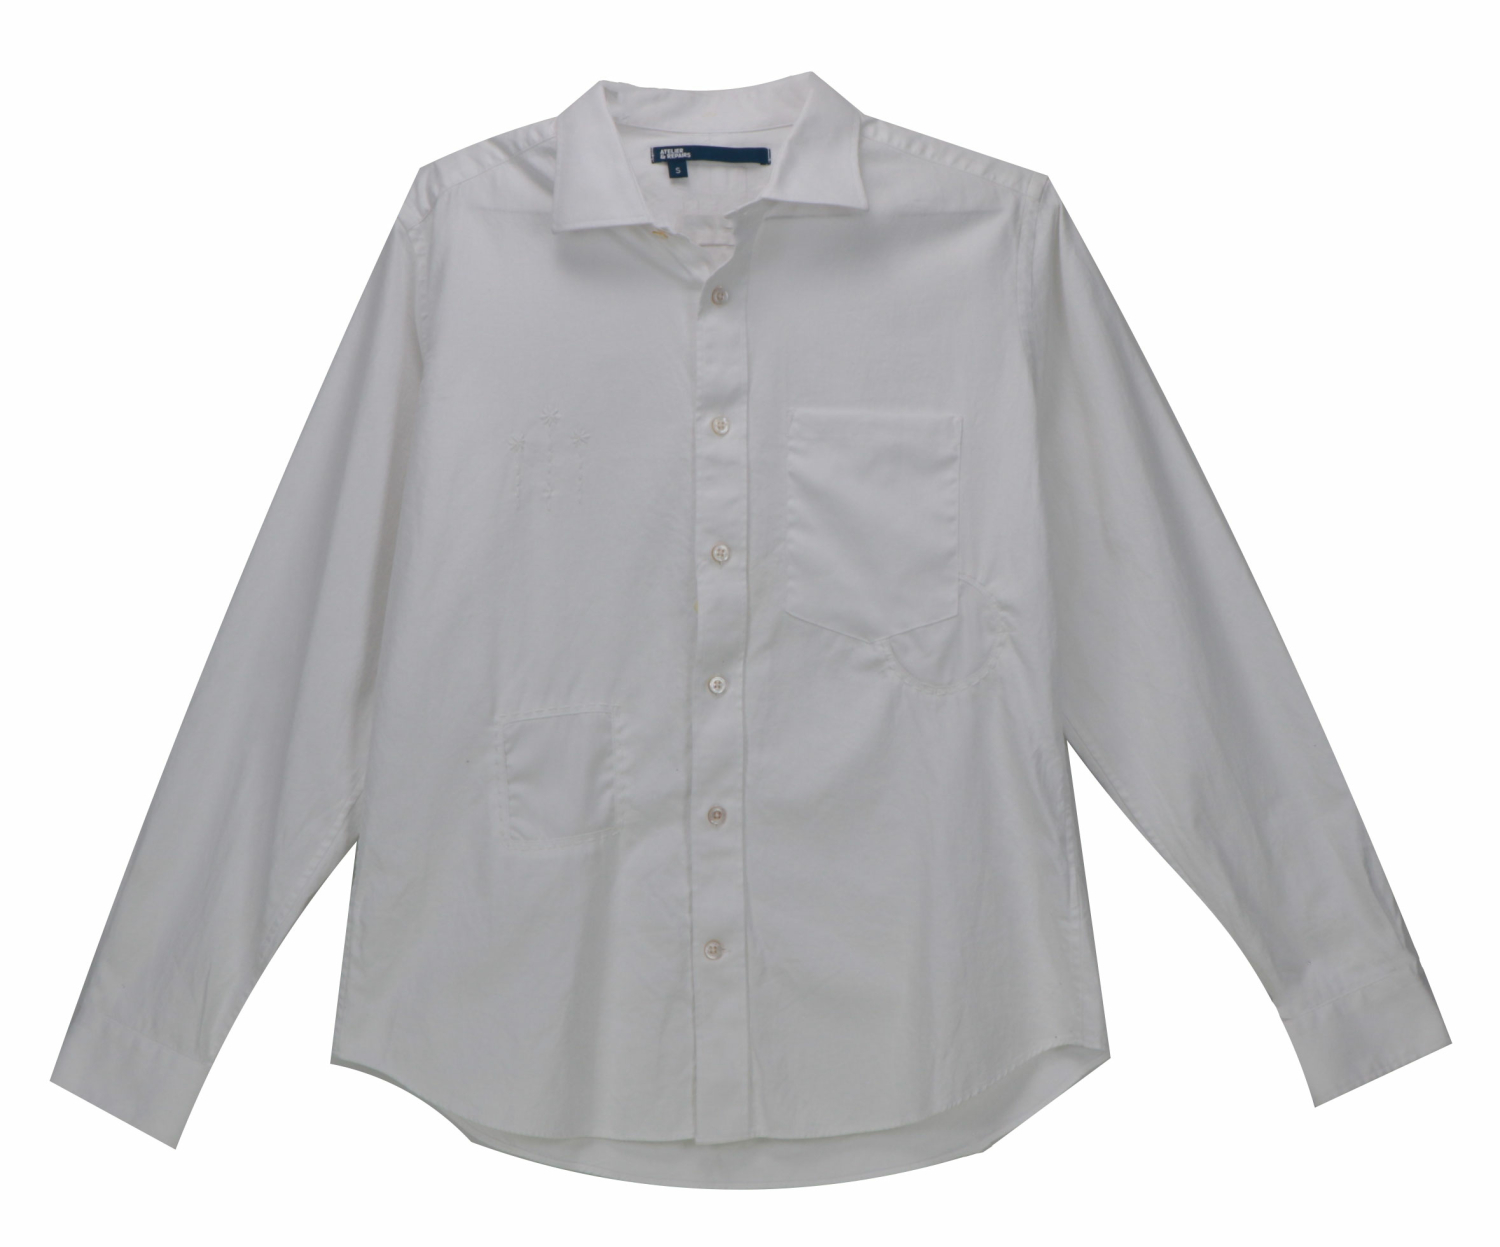 Atelier & Repairs Men's Cotton Button Down with Embroidery Dress Shirt